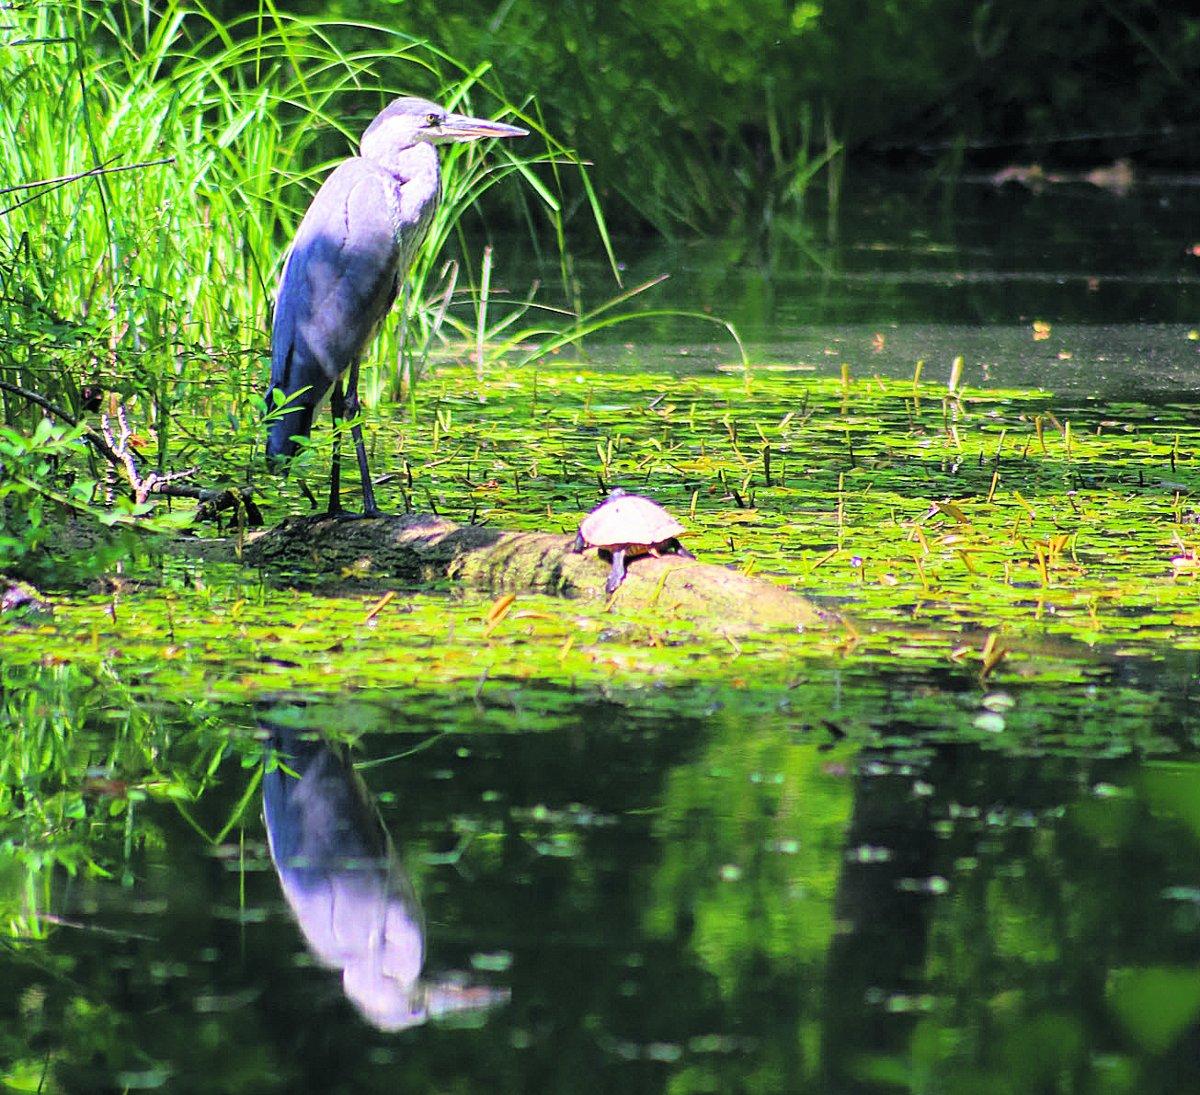 Swiindon Advertiser readers photographs
A heron and terrapin catching the sun
Picture: Billy Gibbs